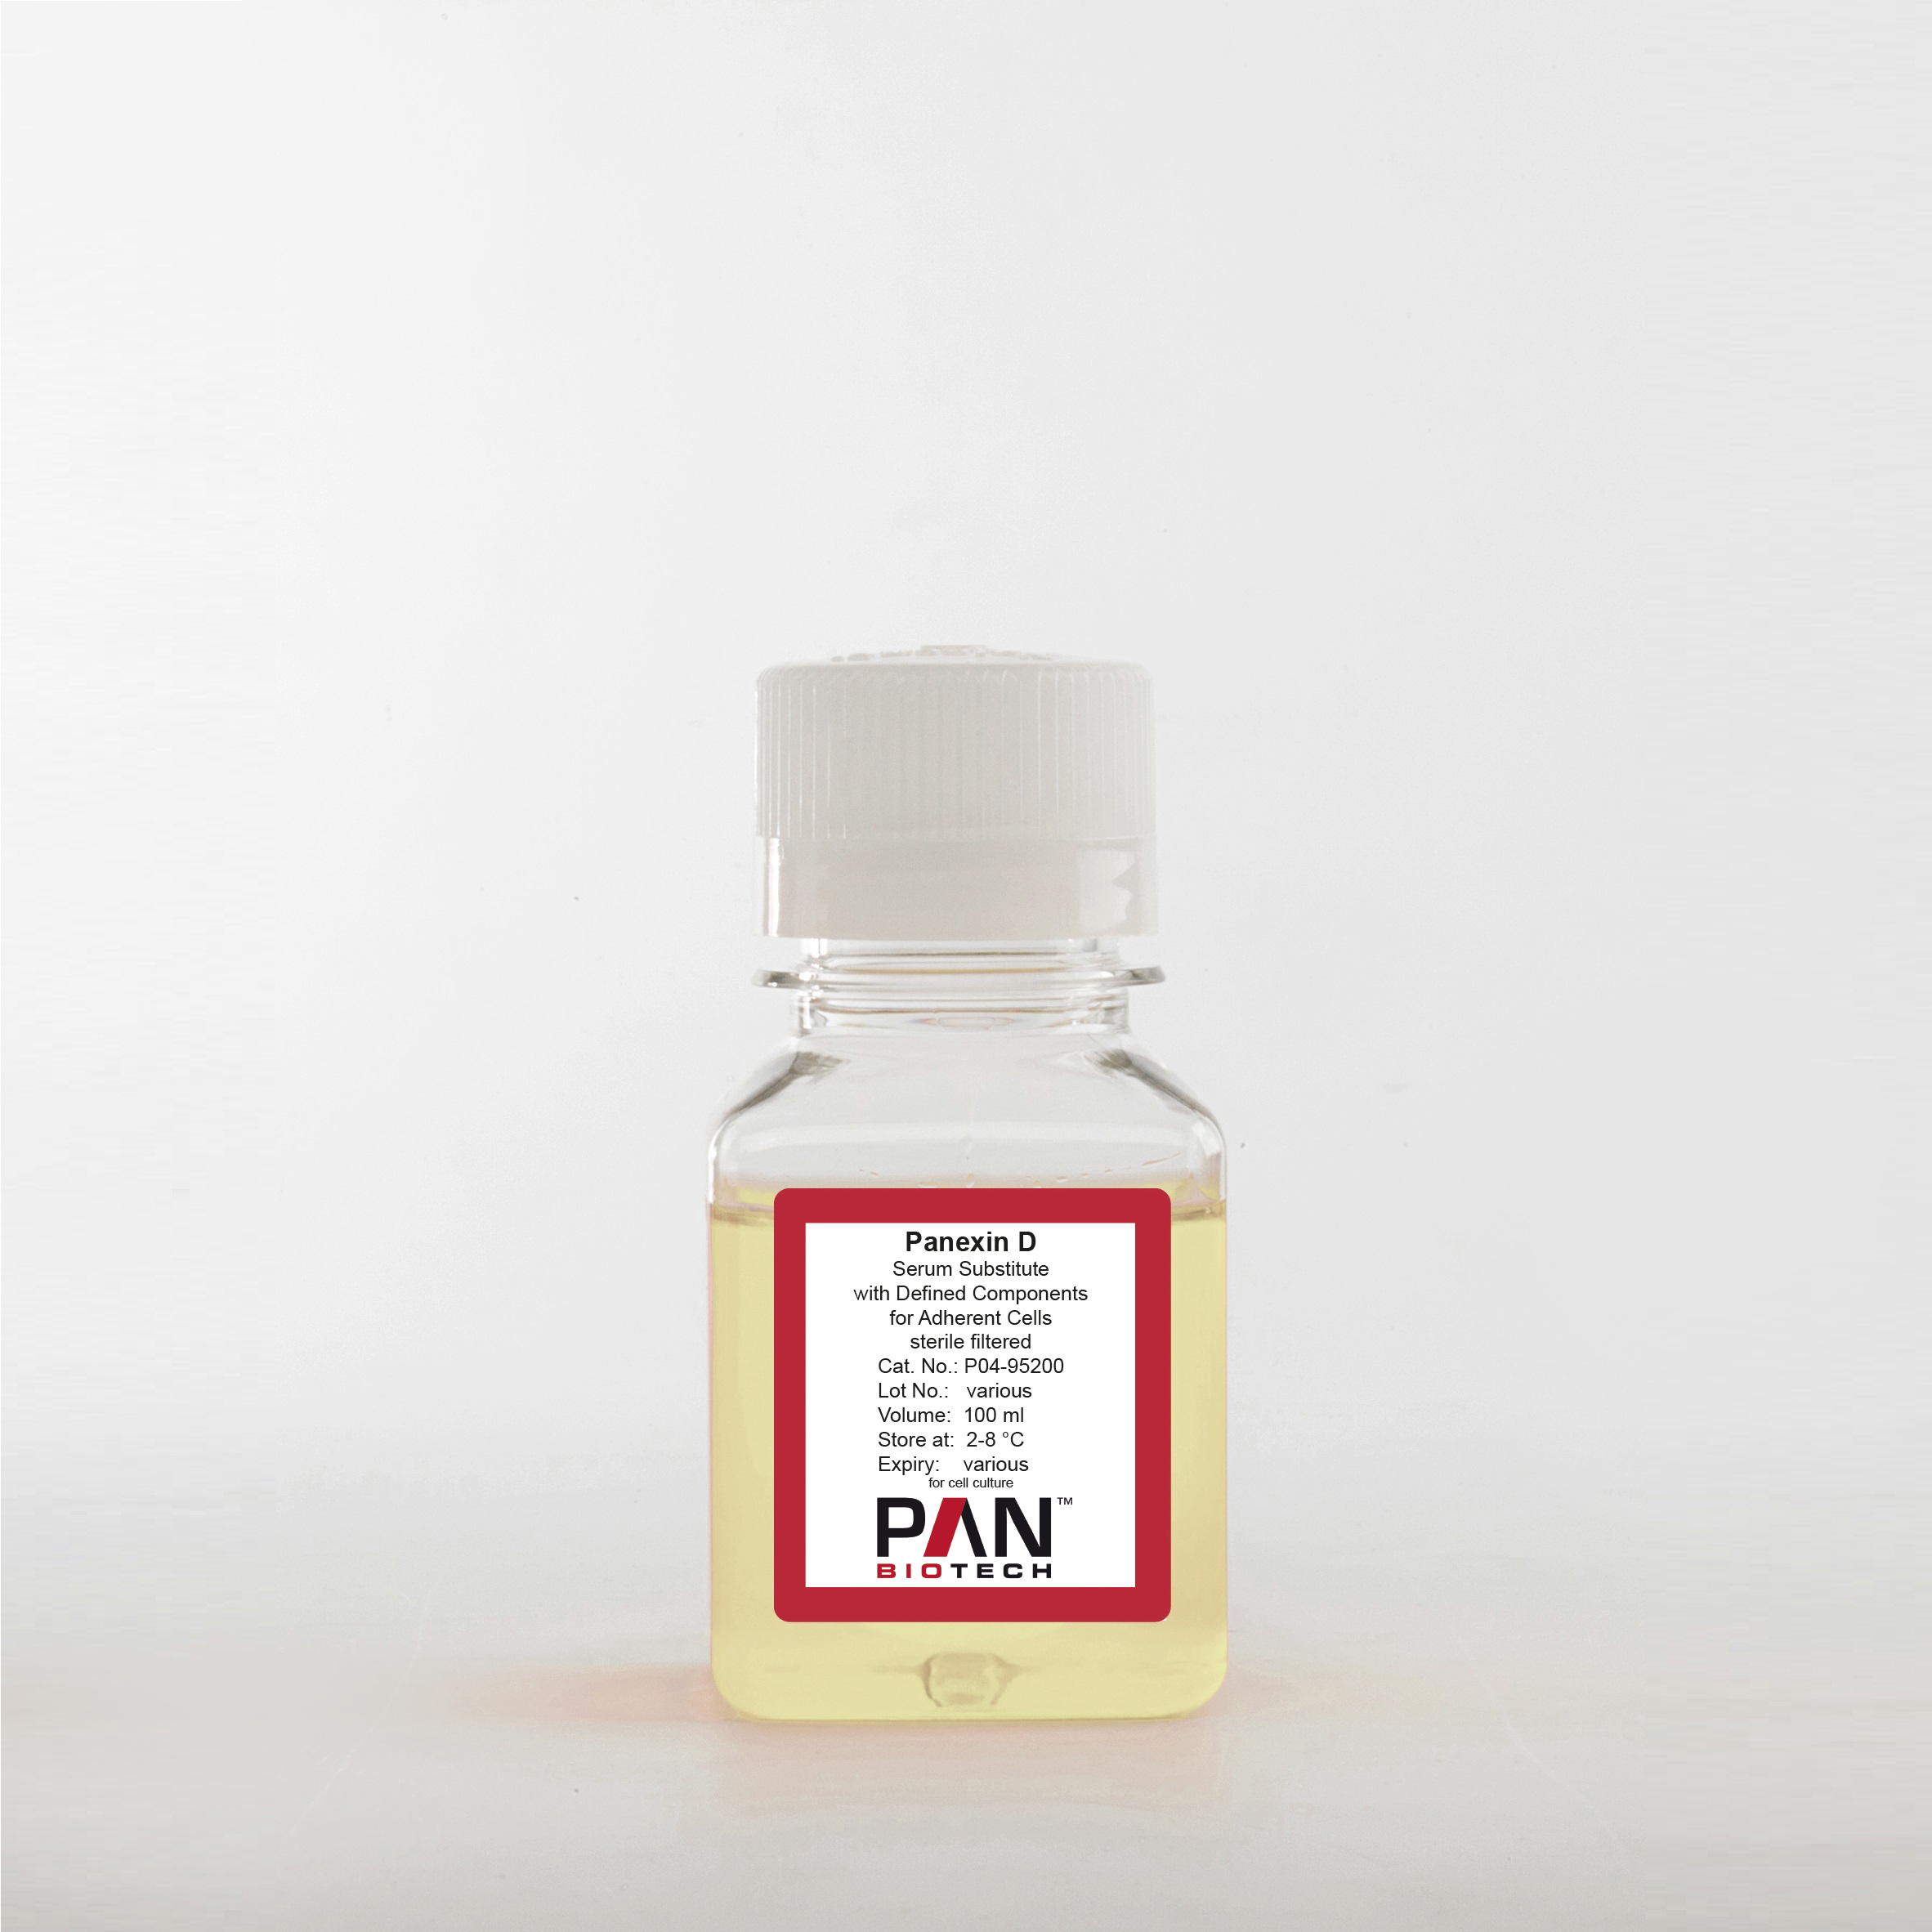 Panexin D, Serum Substitute with Defined Components for Adherent Cells